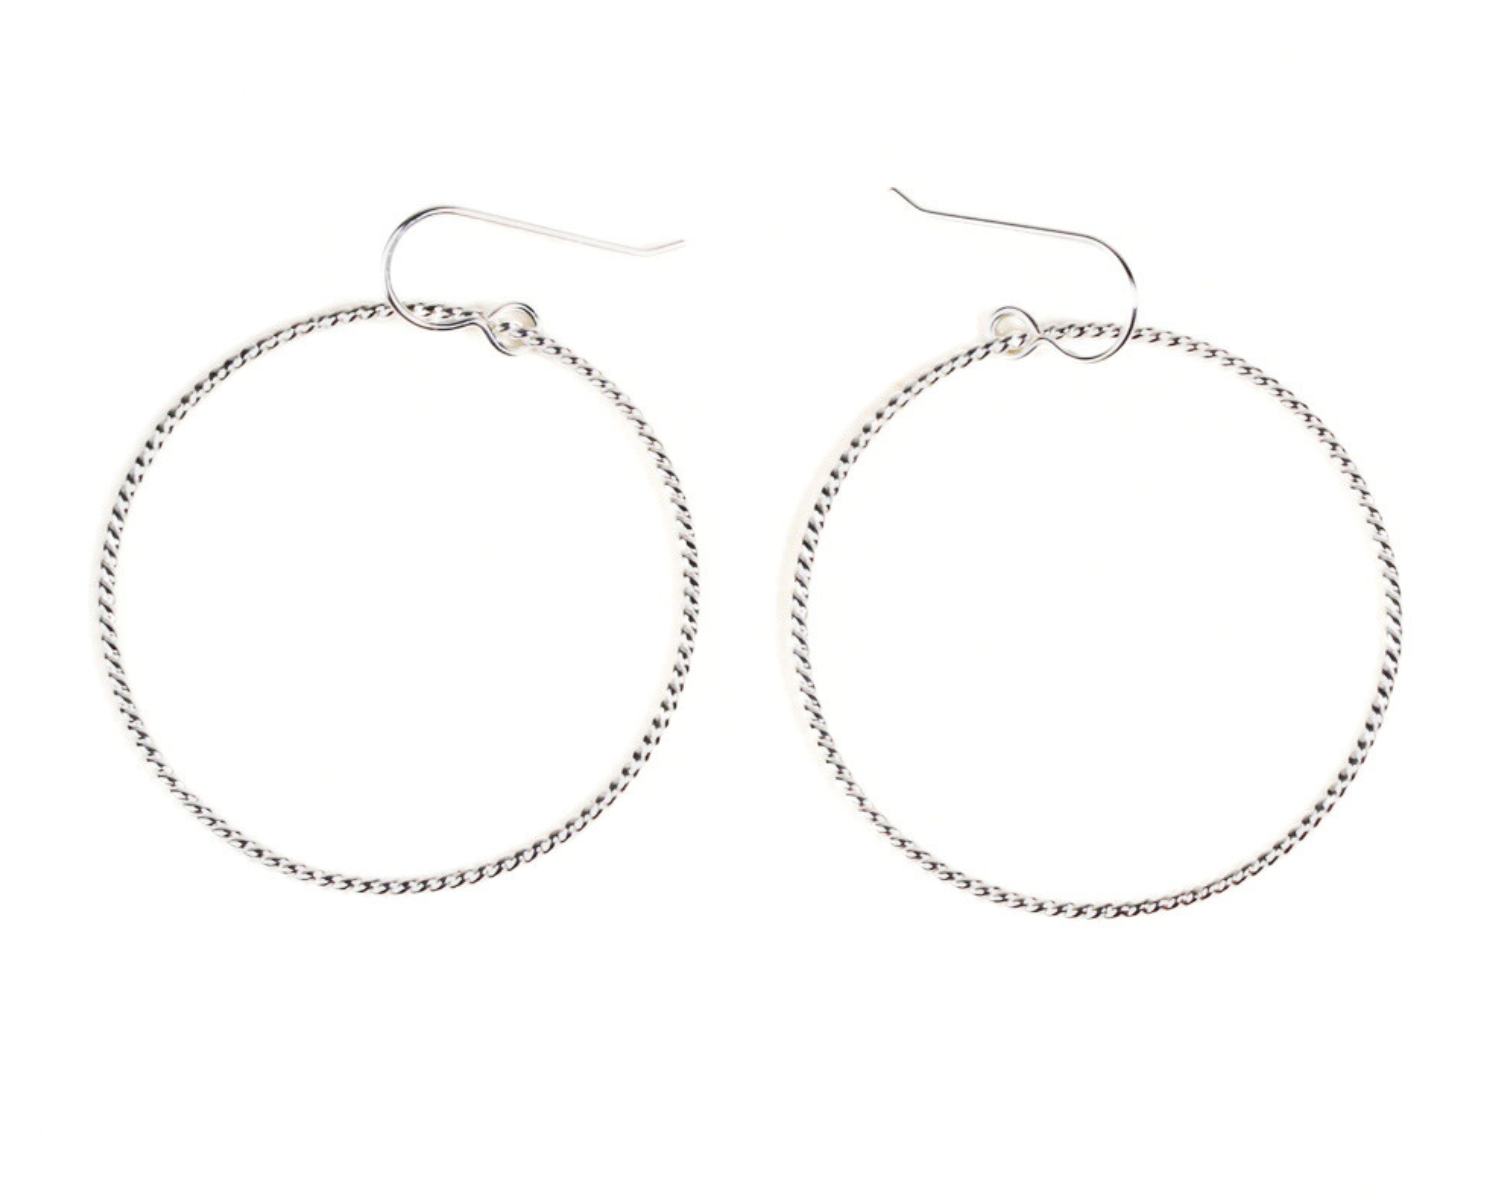 Select your Twisted Hoops in 925 Sterling Silver or 14 karat Yellow Gold Filled or Rose Gold Filled. Select size Small, measuring 1 inch or Medium, 1.5 inches. Bring Twisted Hoop Earrings into your wardrobe and discover an instant everyday favorite.